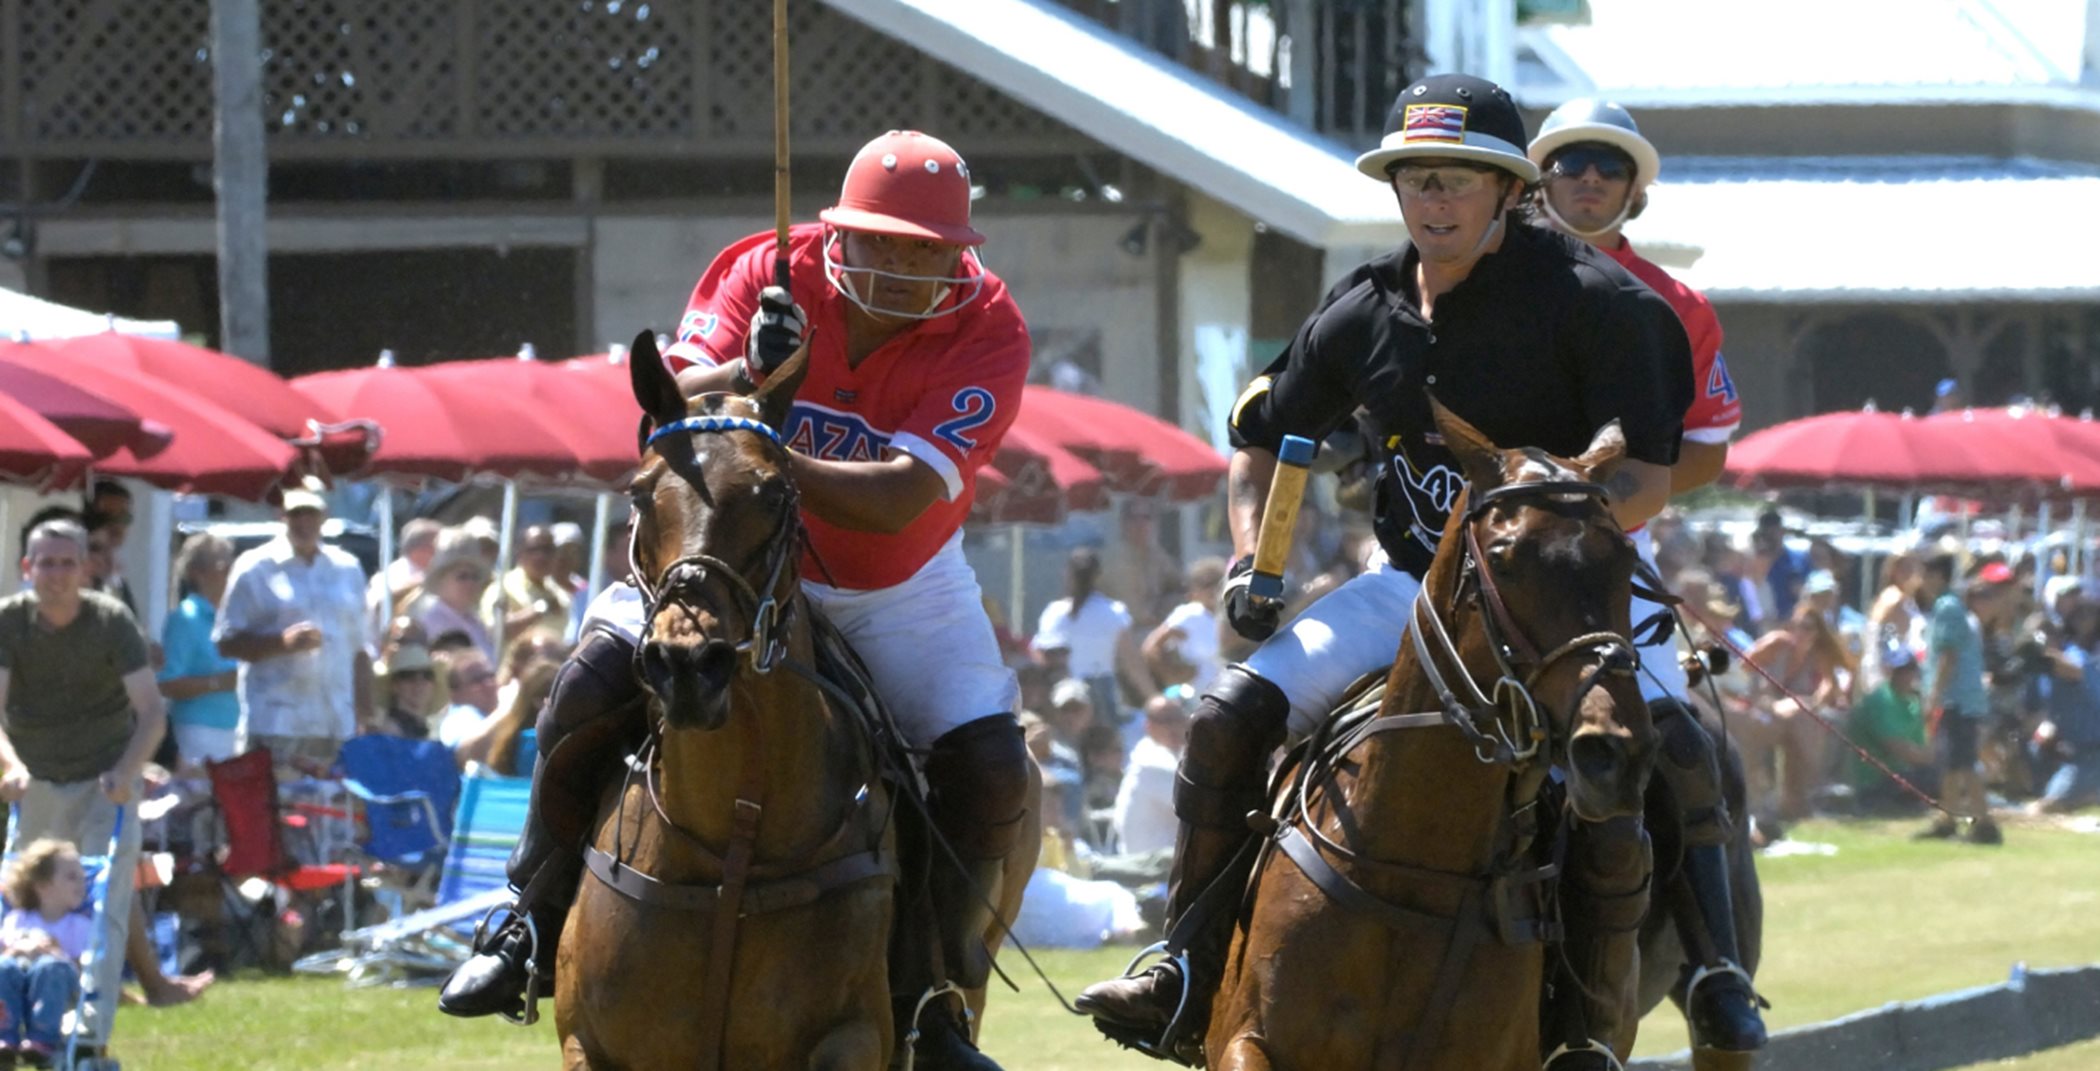 Polo players and horses